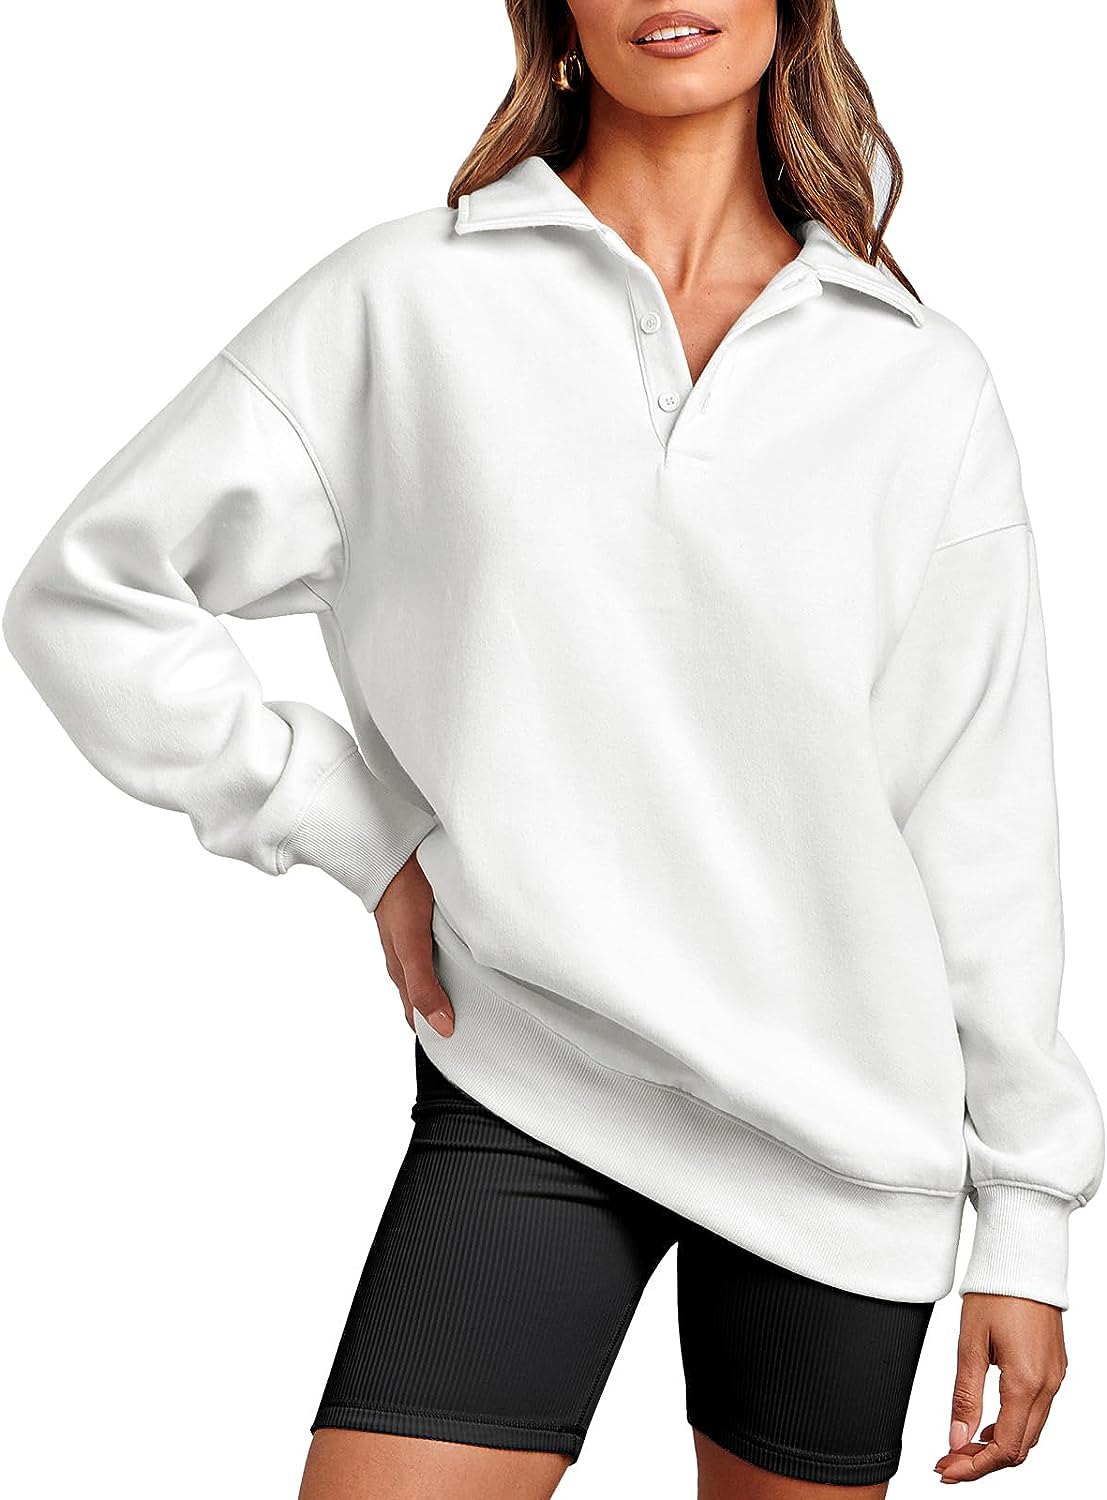 Caracilia Oversized Sweatshirt for Women Long Sleeves Solid Color